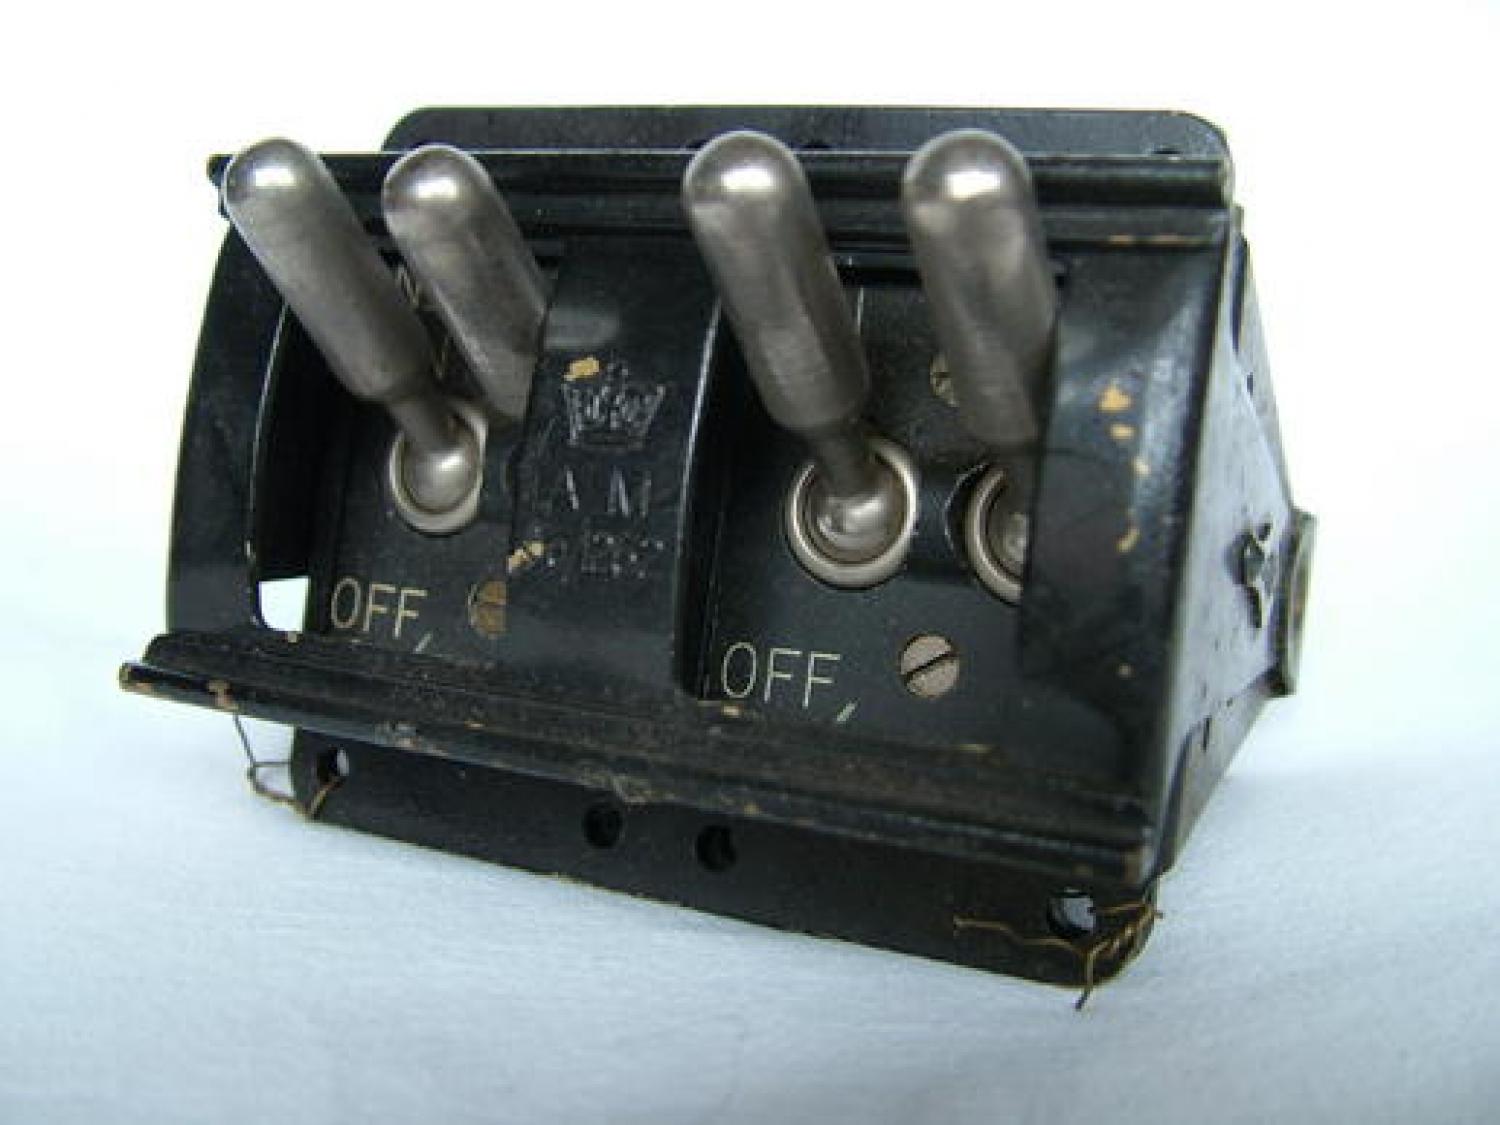 R.A.F. Lancaster Magneto Switches / Gate